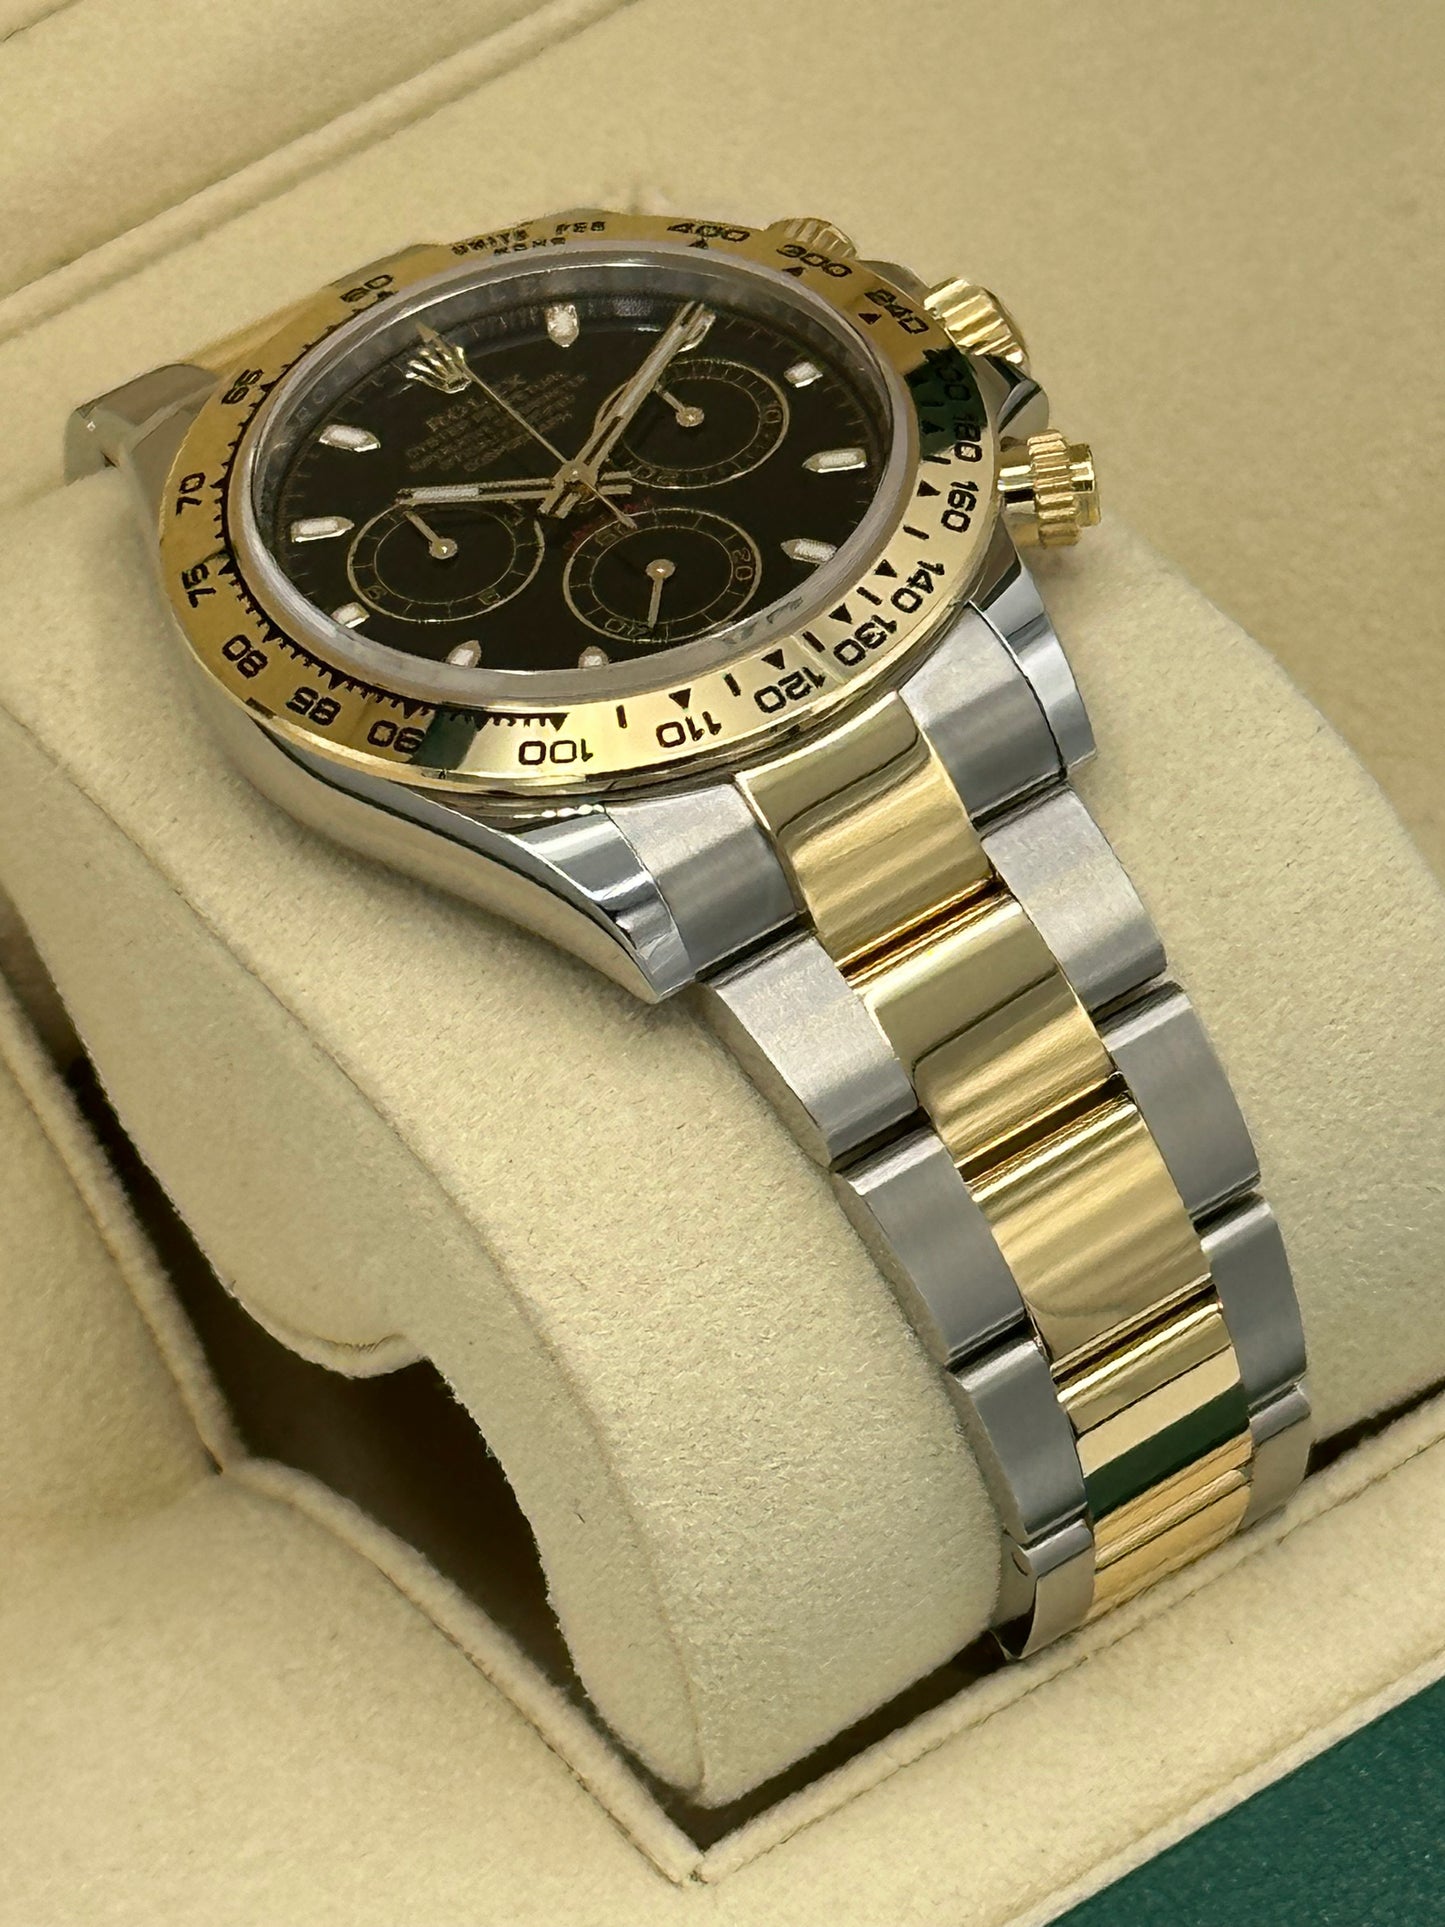 2022 Rolex Daytona 116503 Two-Tone Stainless Steel/Gold Black Dial - MyWatchLLC